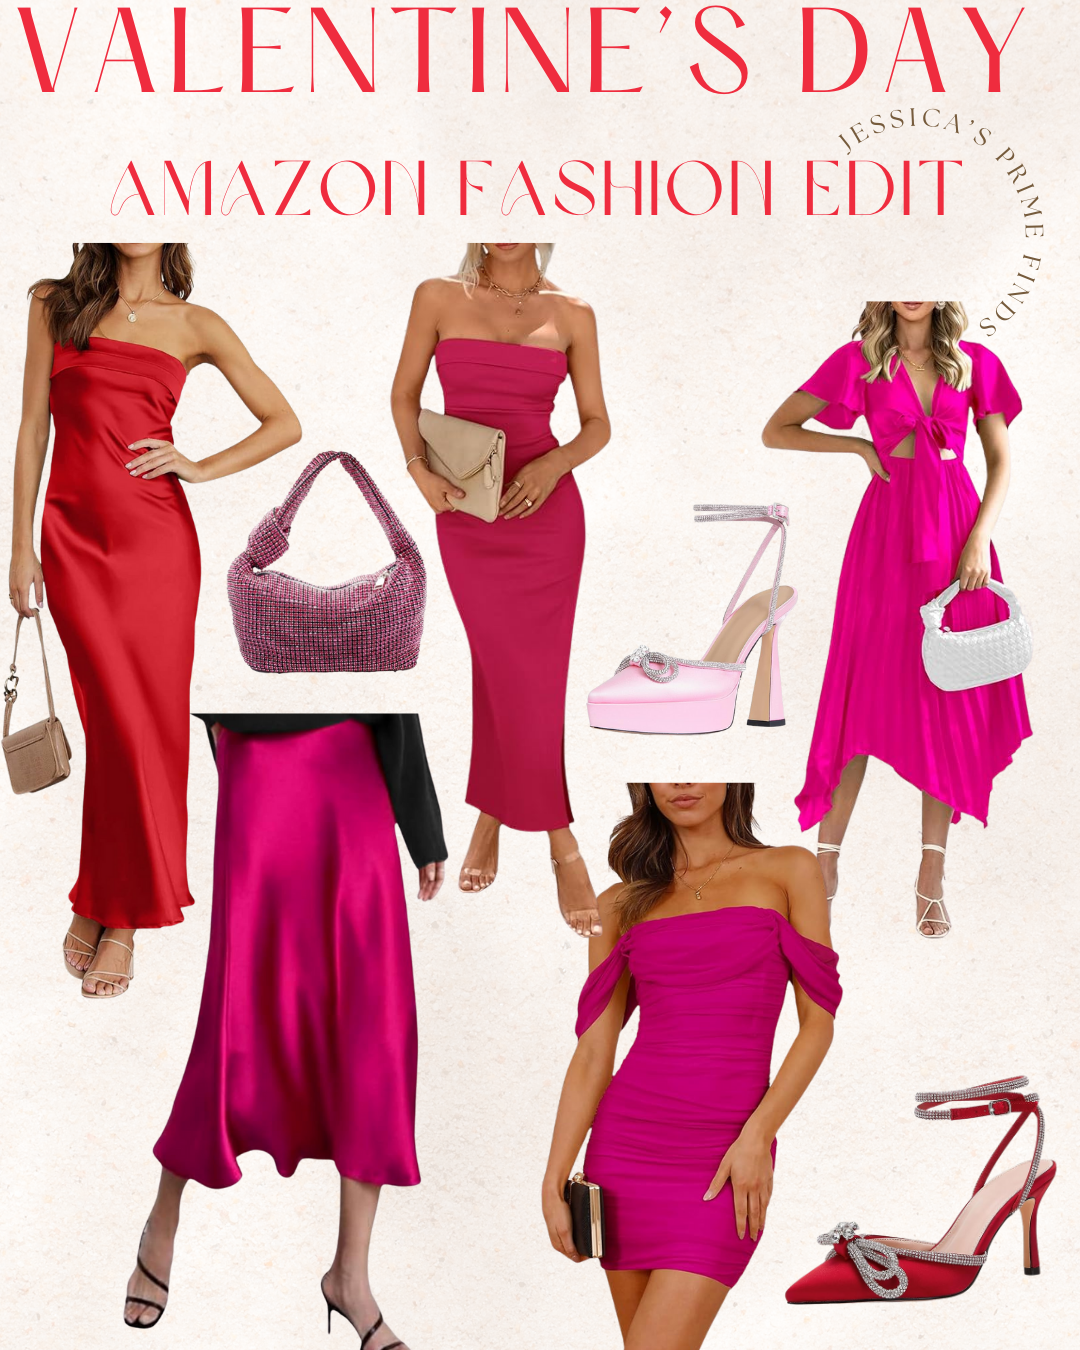 Valentine's Day Fashion Edit Amazon Fashion pink and red dresses skirts shoes purses bags 